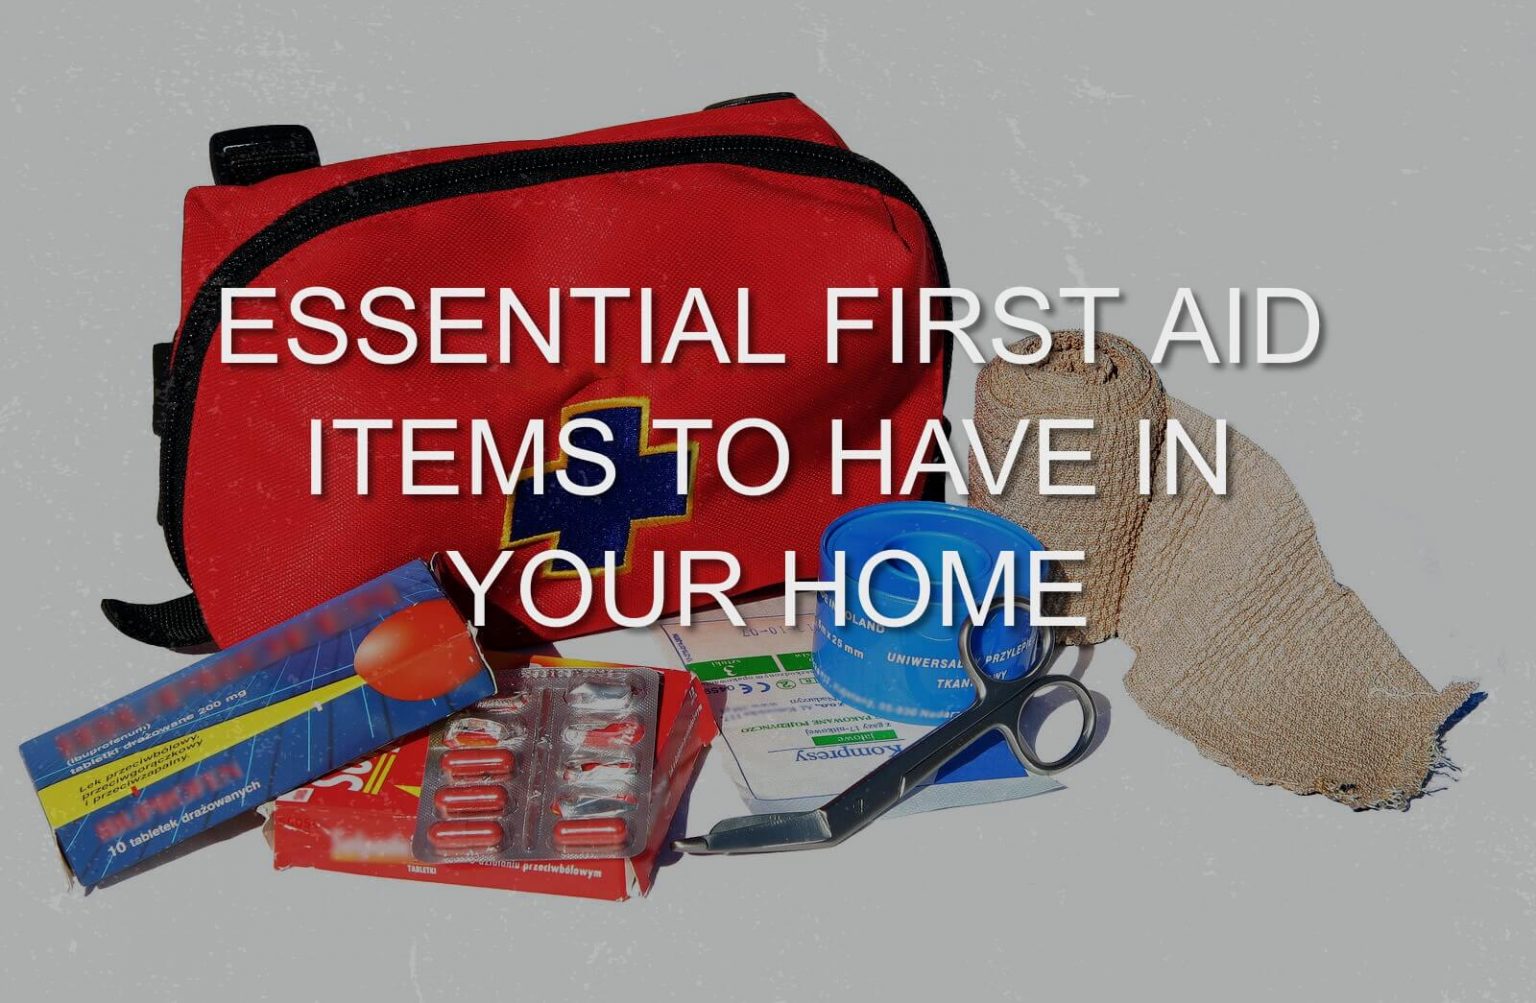 Essential First Aid Items To Have In Your Home